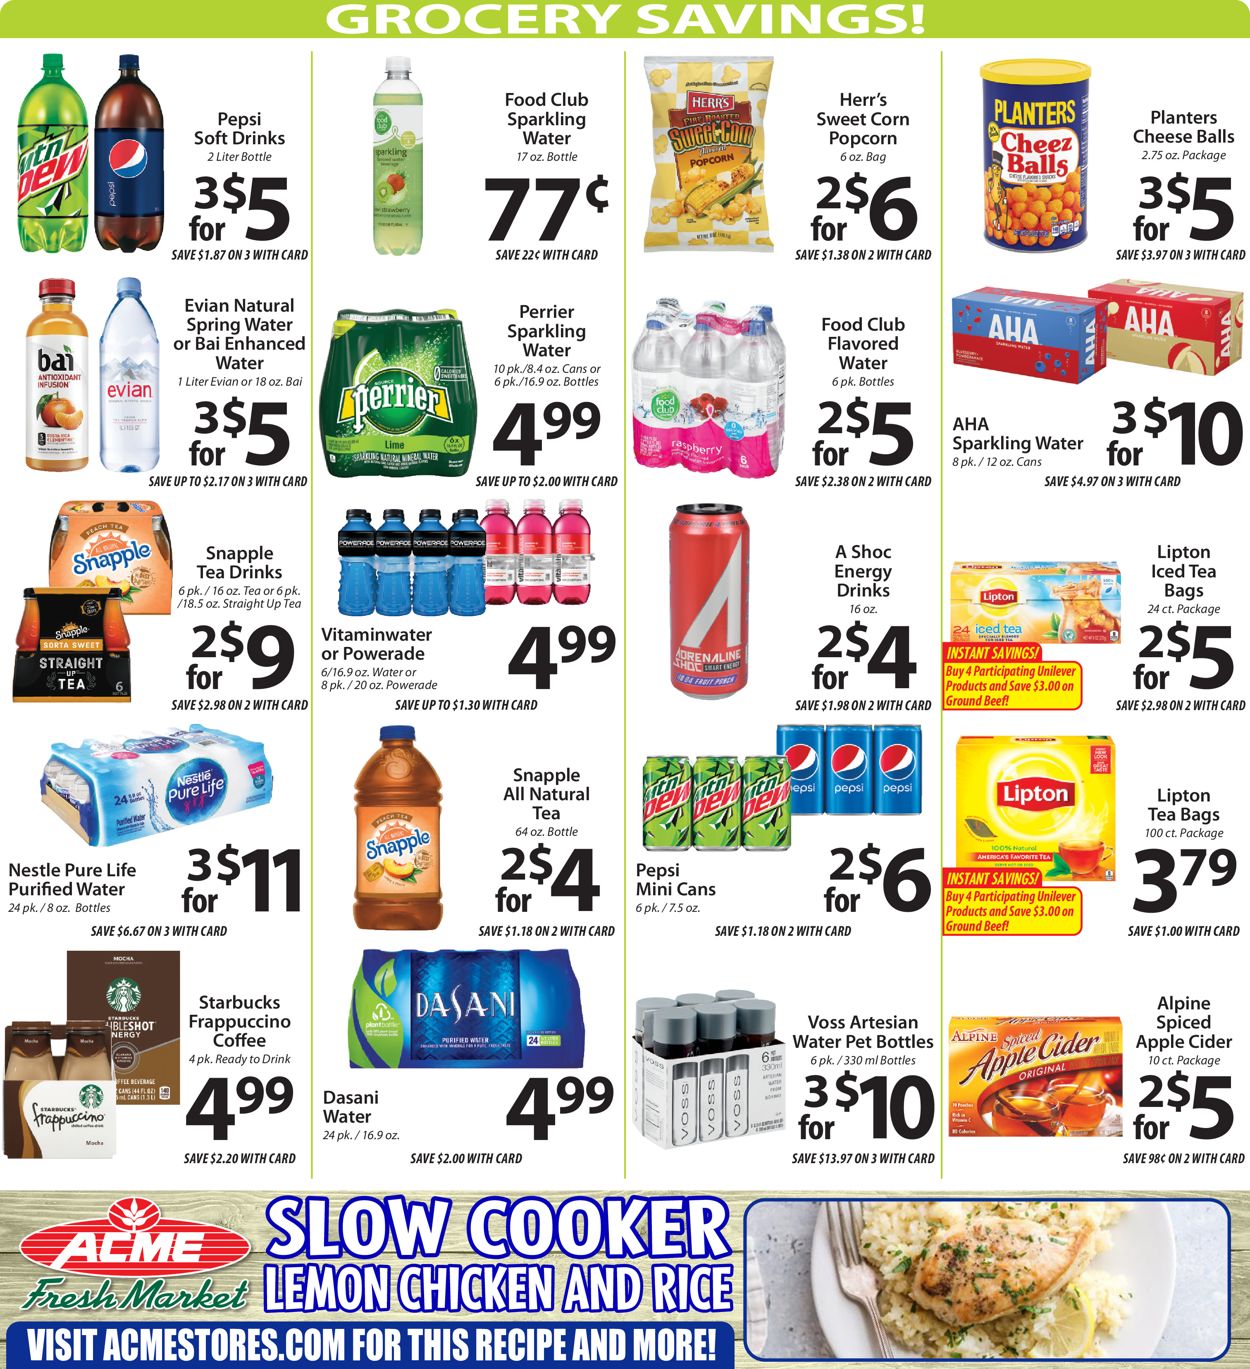 Acme Fresh Market Ad from 11/05/2020